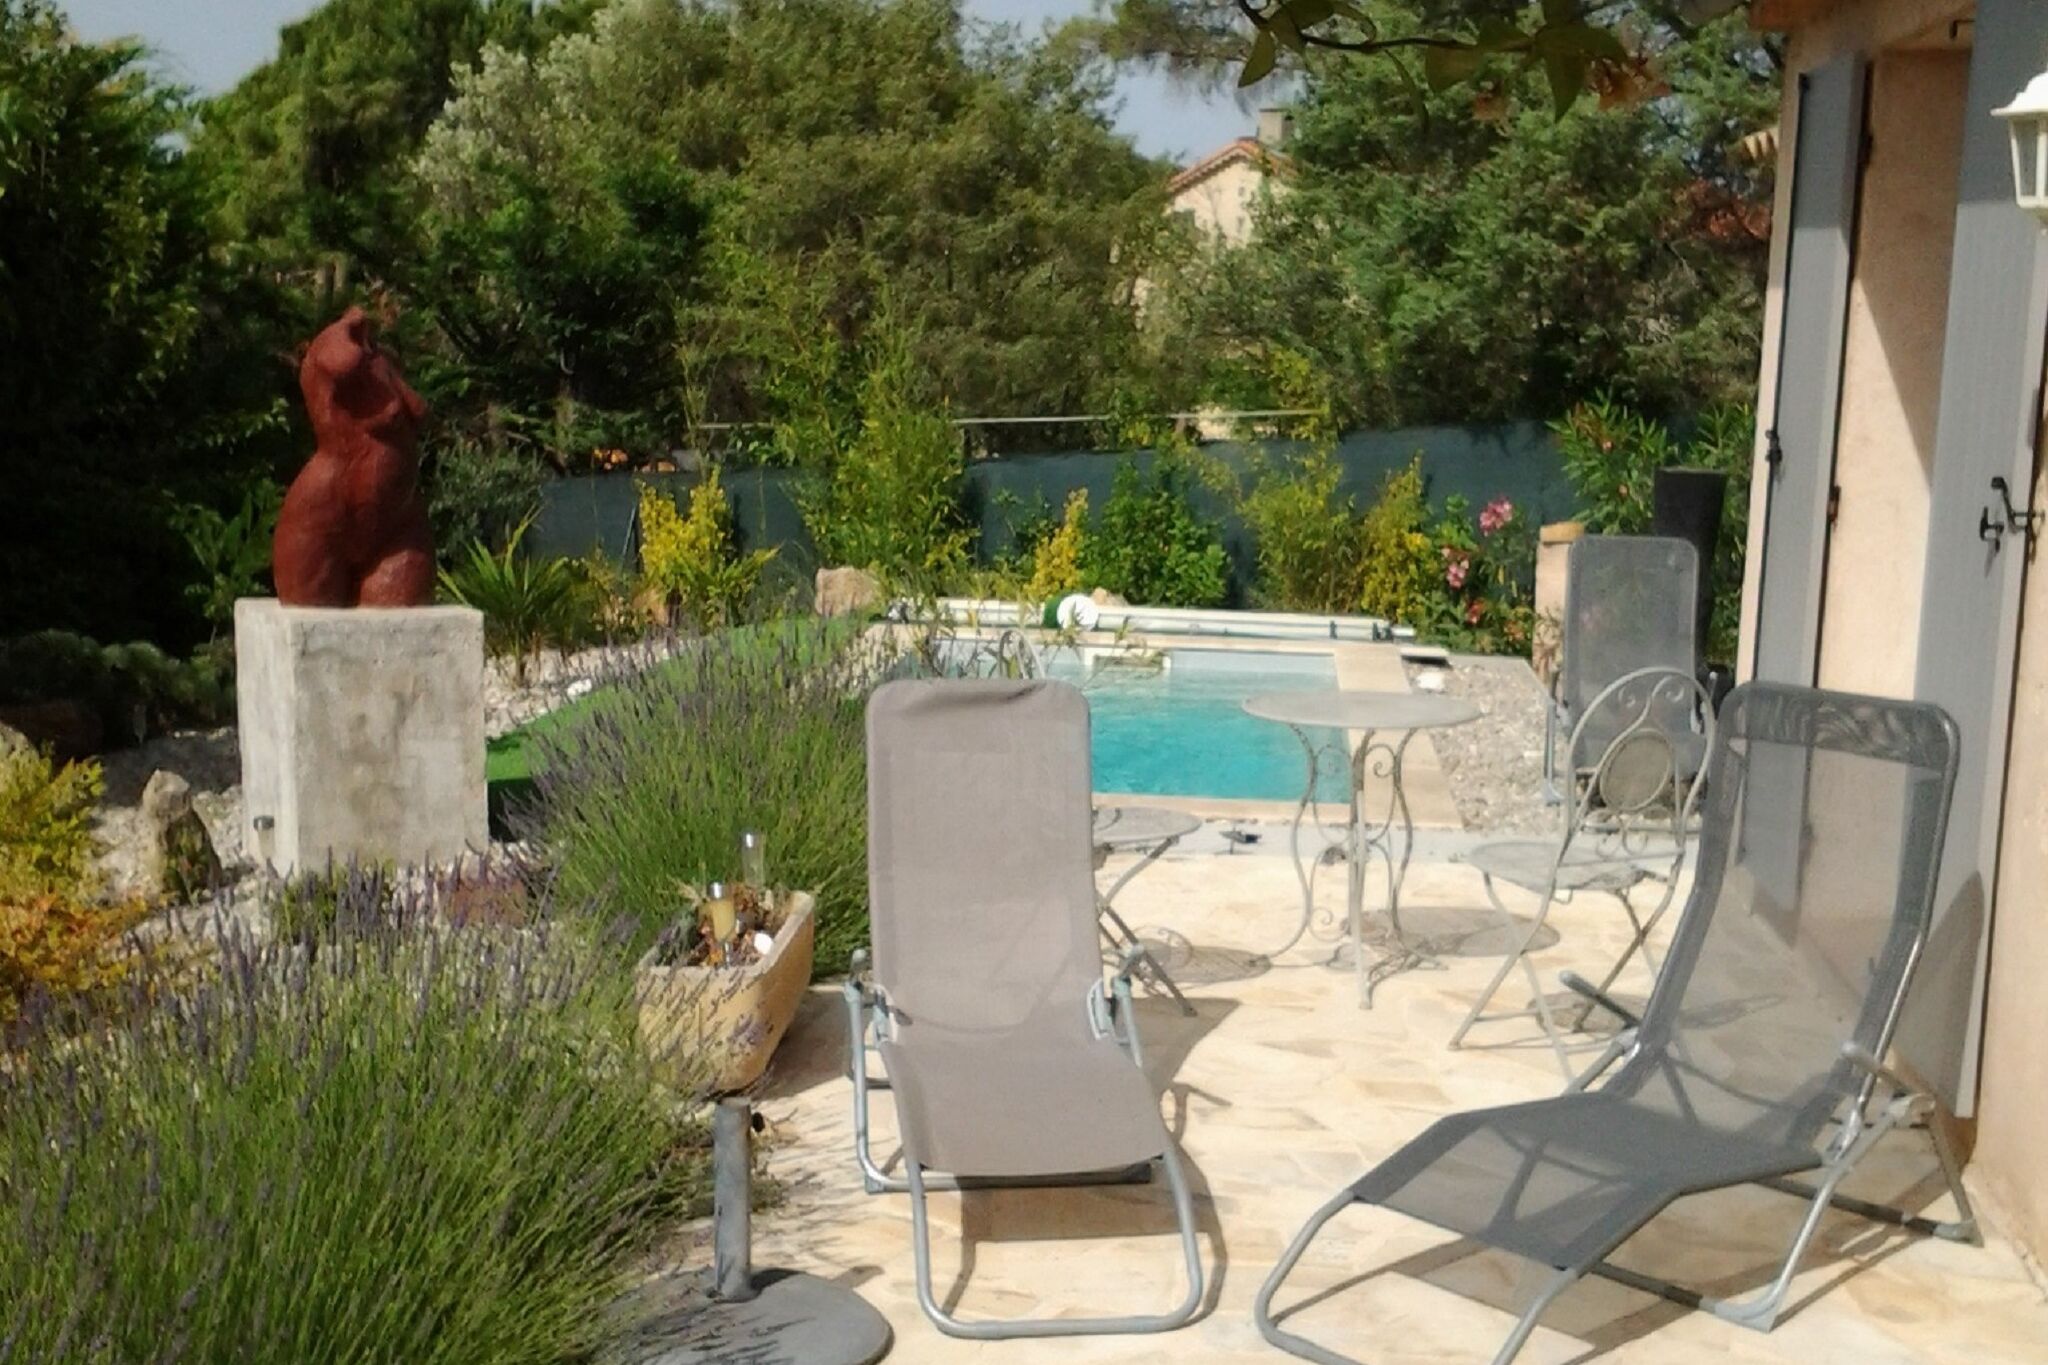 Romantic holiday home with a small private pool, located in the Provence.